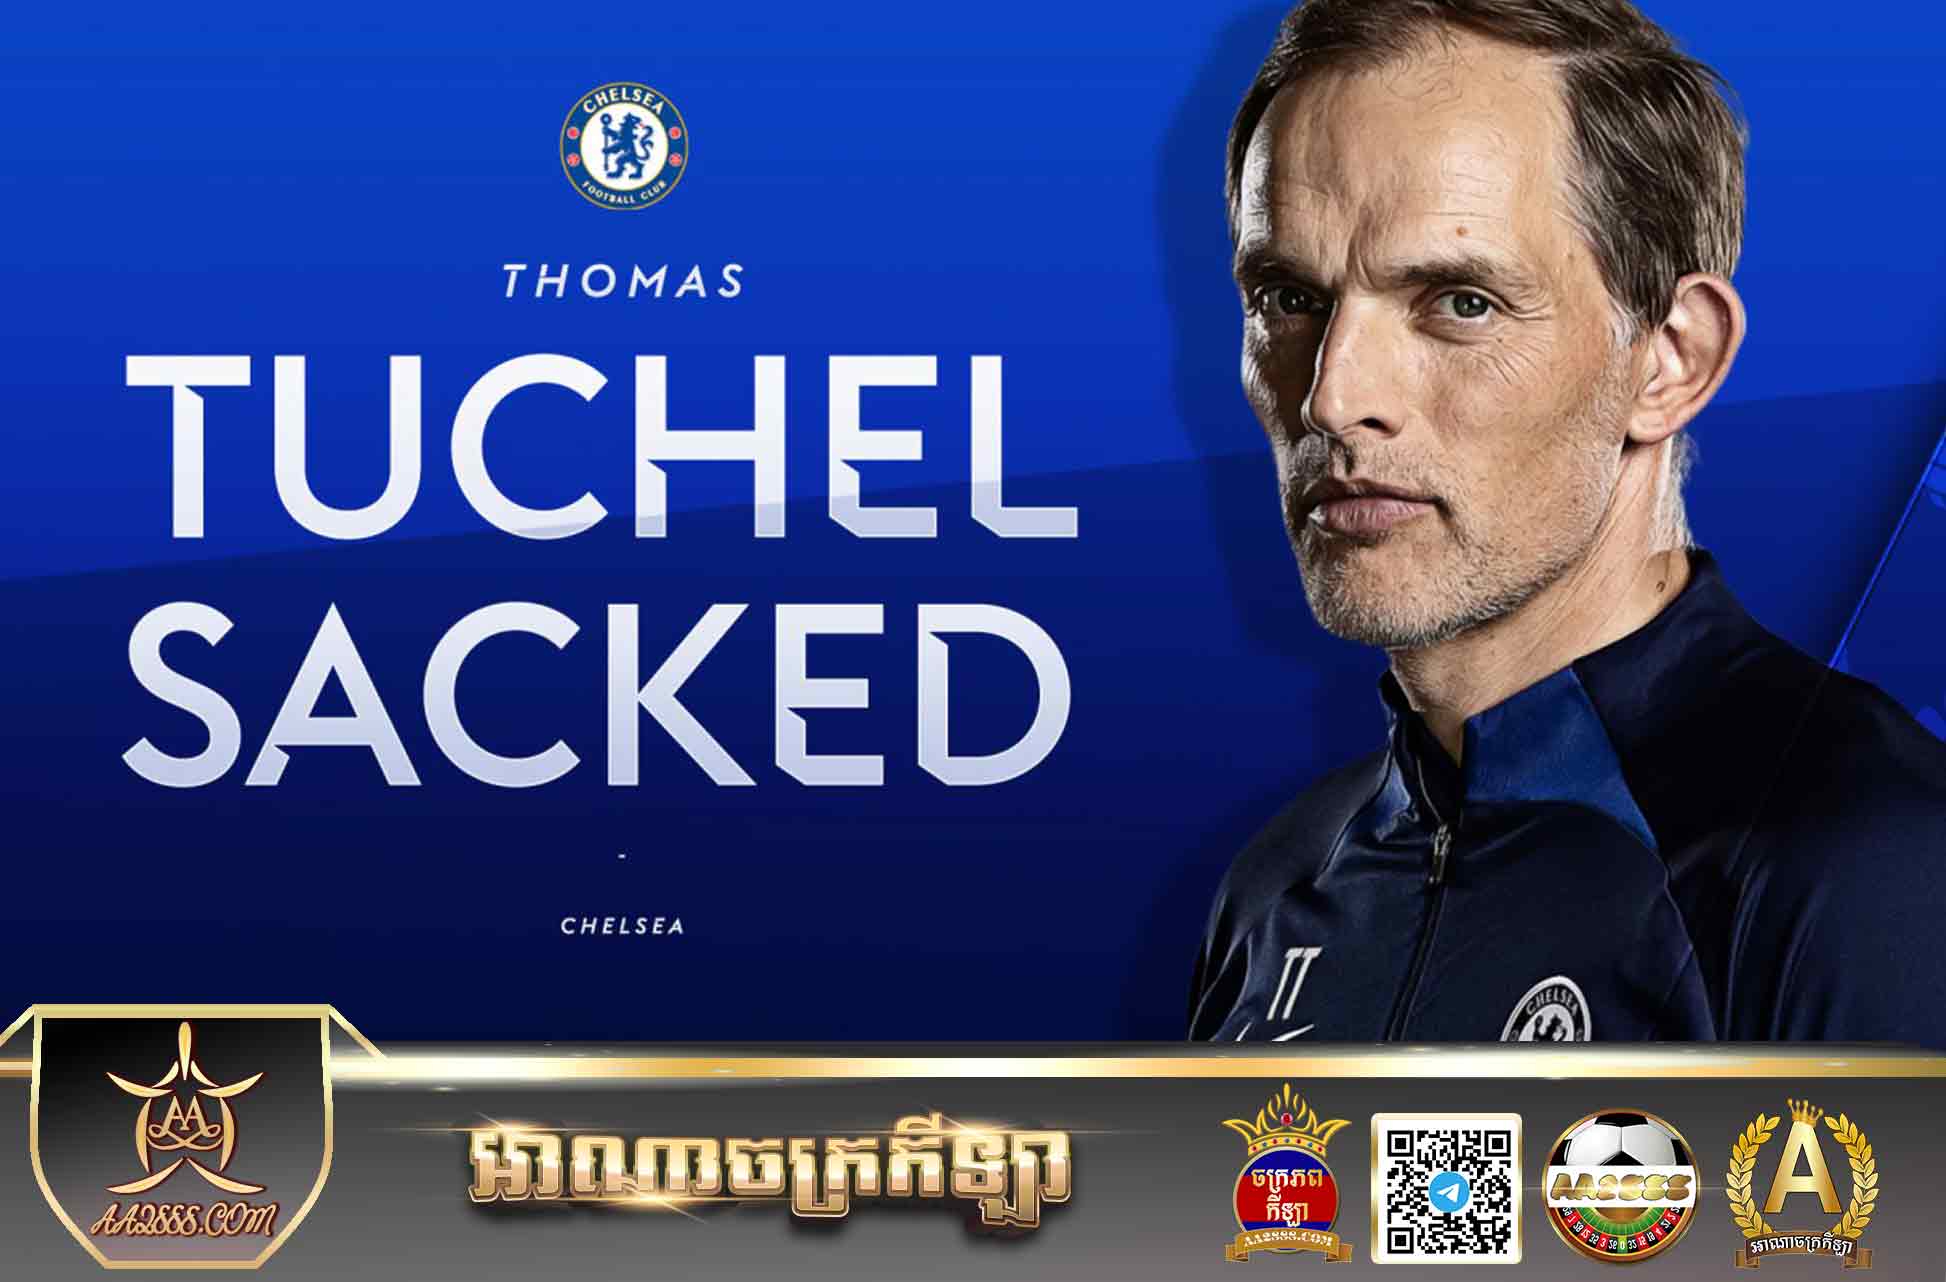 Tuchel was sacked by Chelsea 